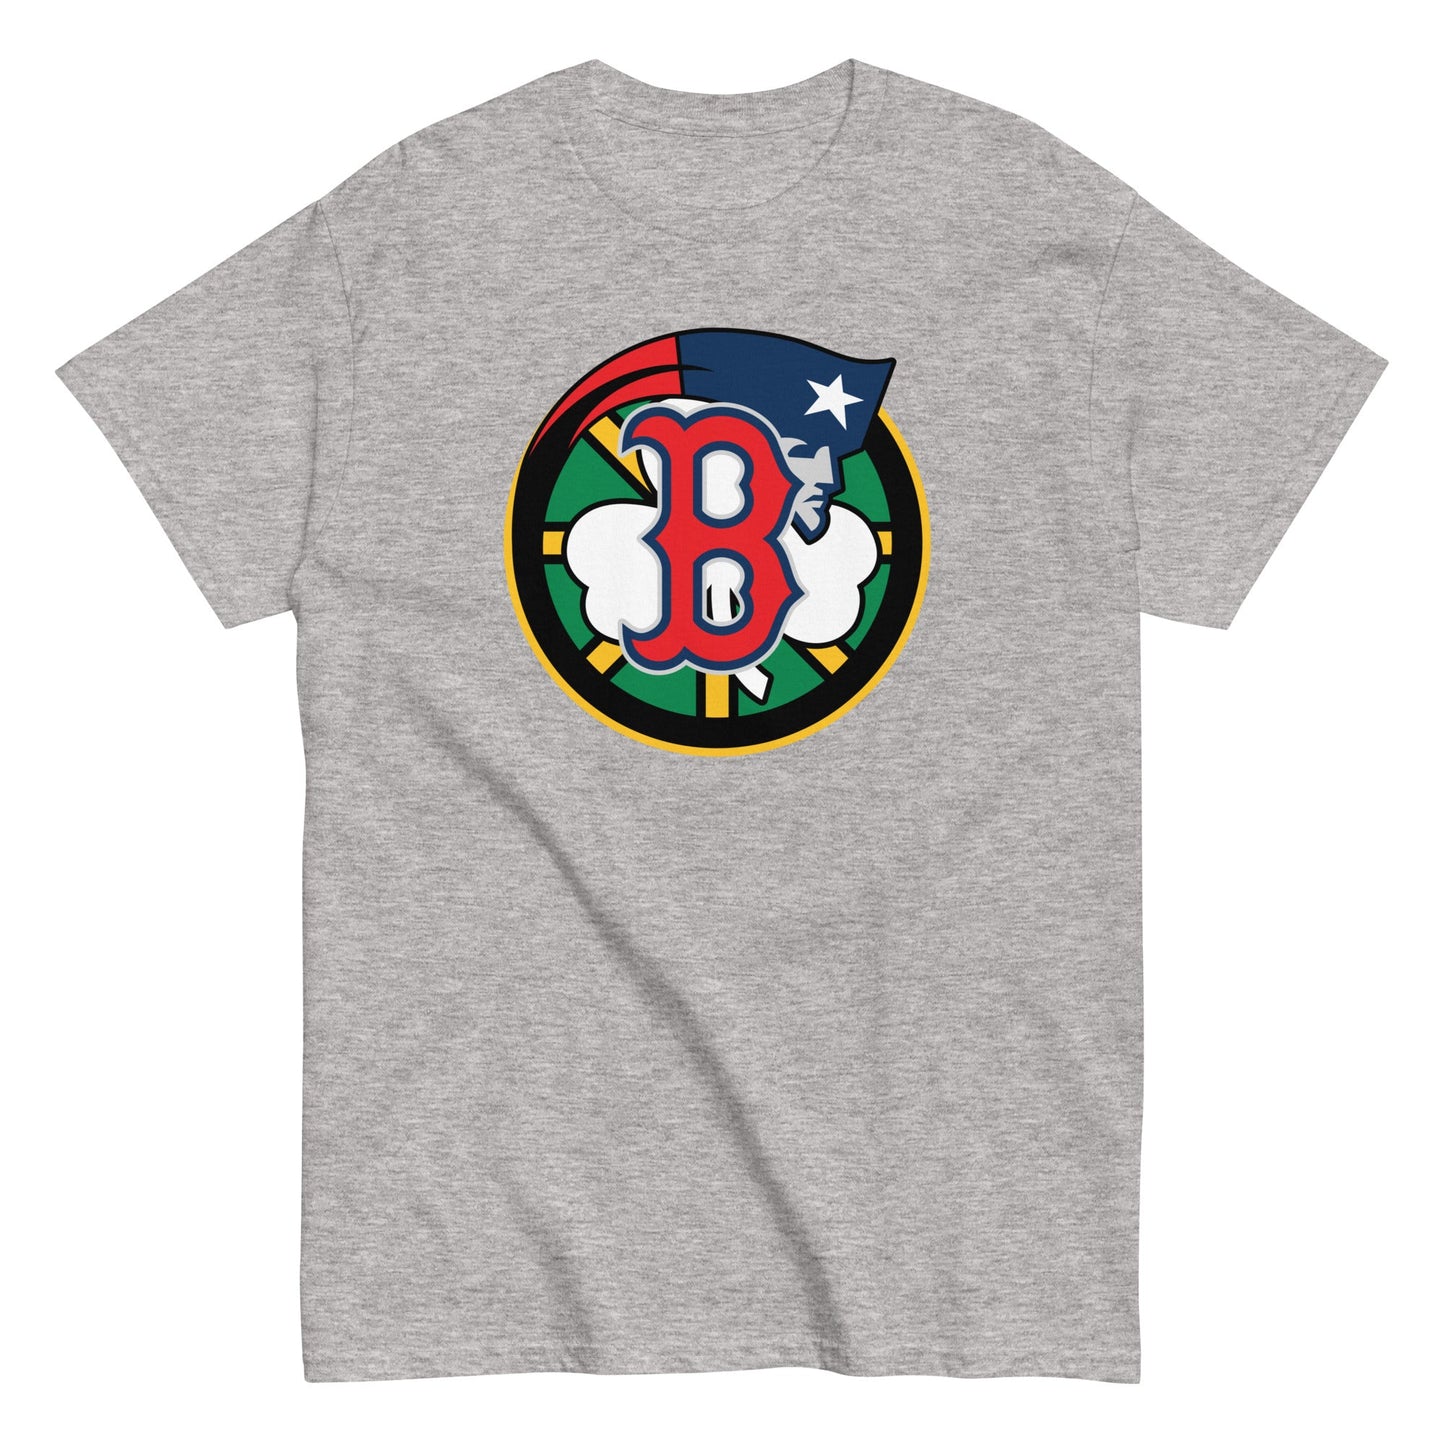 BOS Tee - Full Color